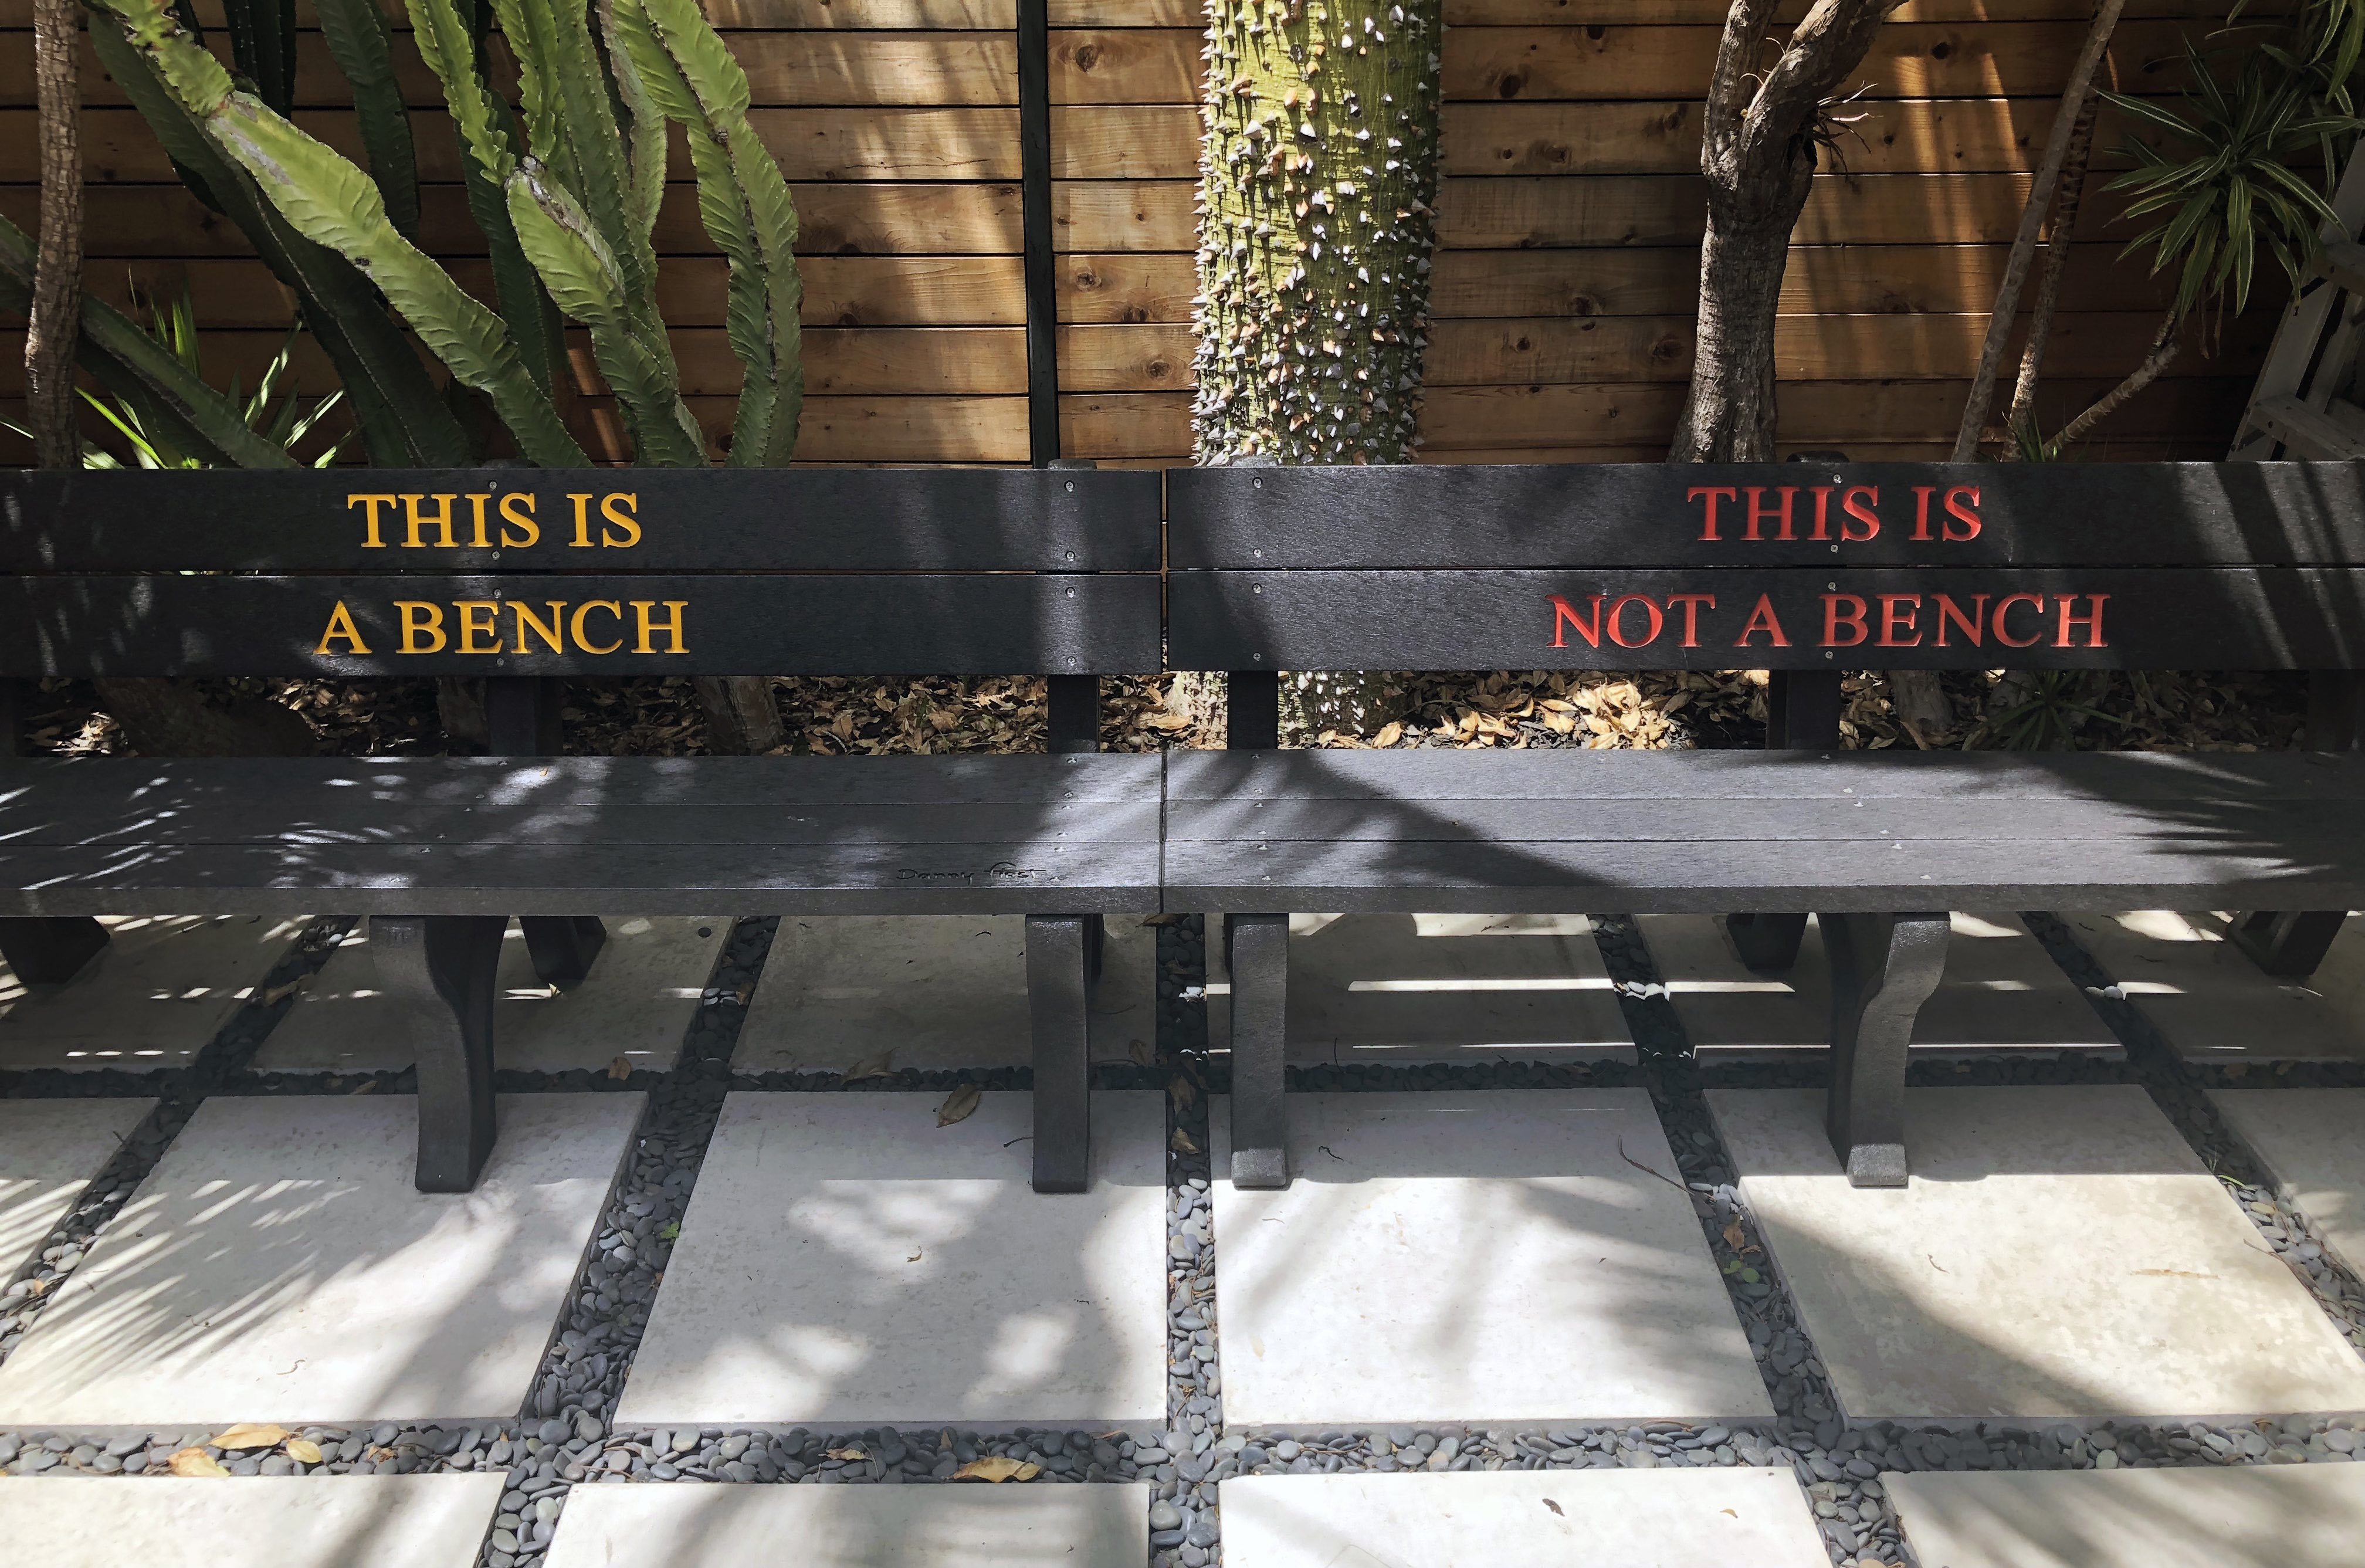 miansai nation with bench that reads "This is a bench... This is not a bench"